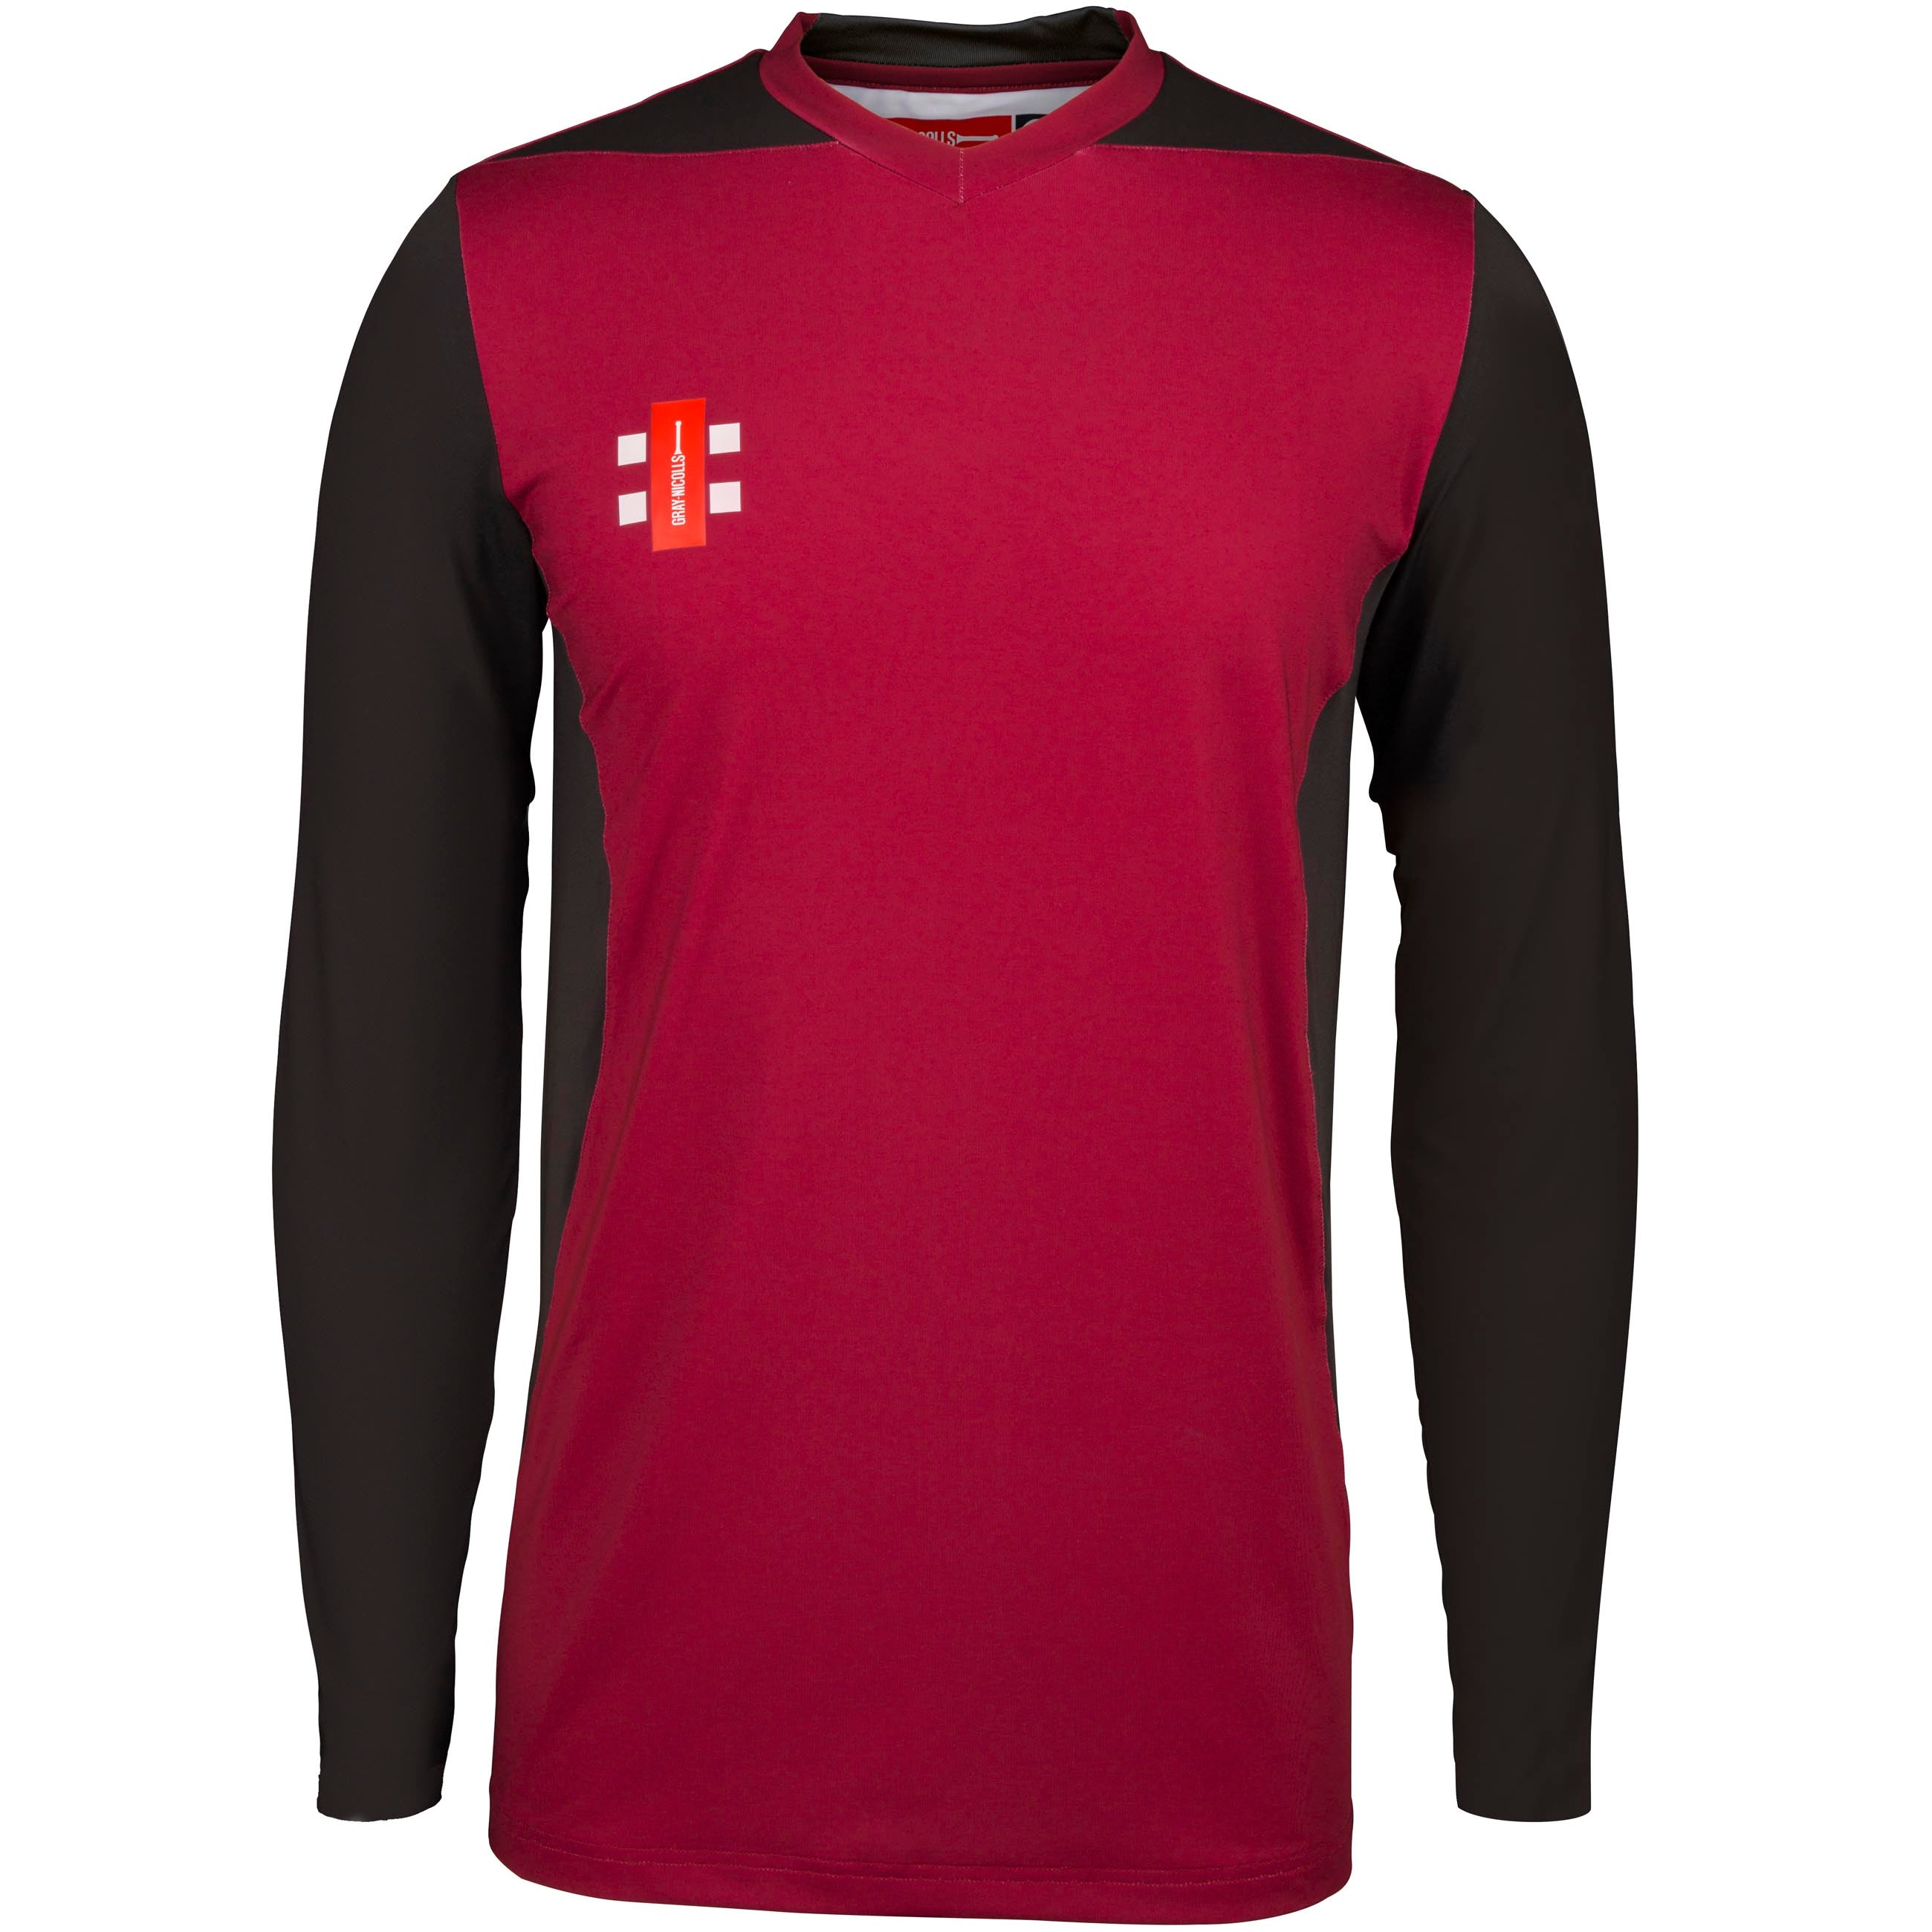 2600 CCFD19 5030805 Shirt T20 Long Sleeve Maroon & Black, Front